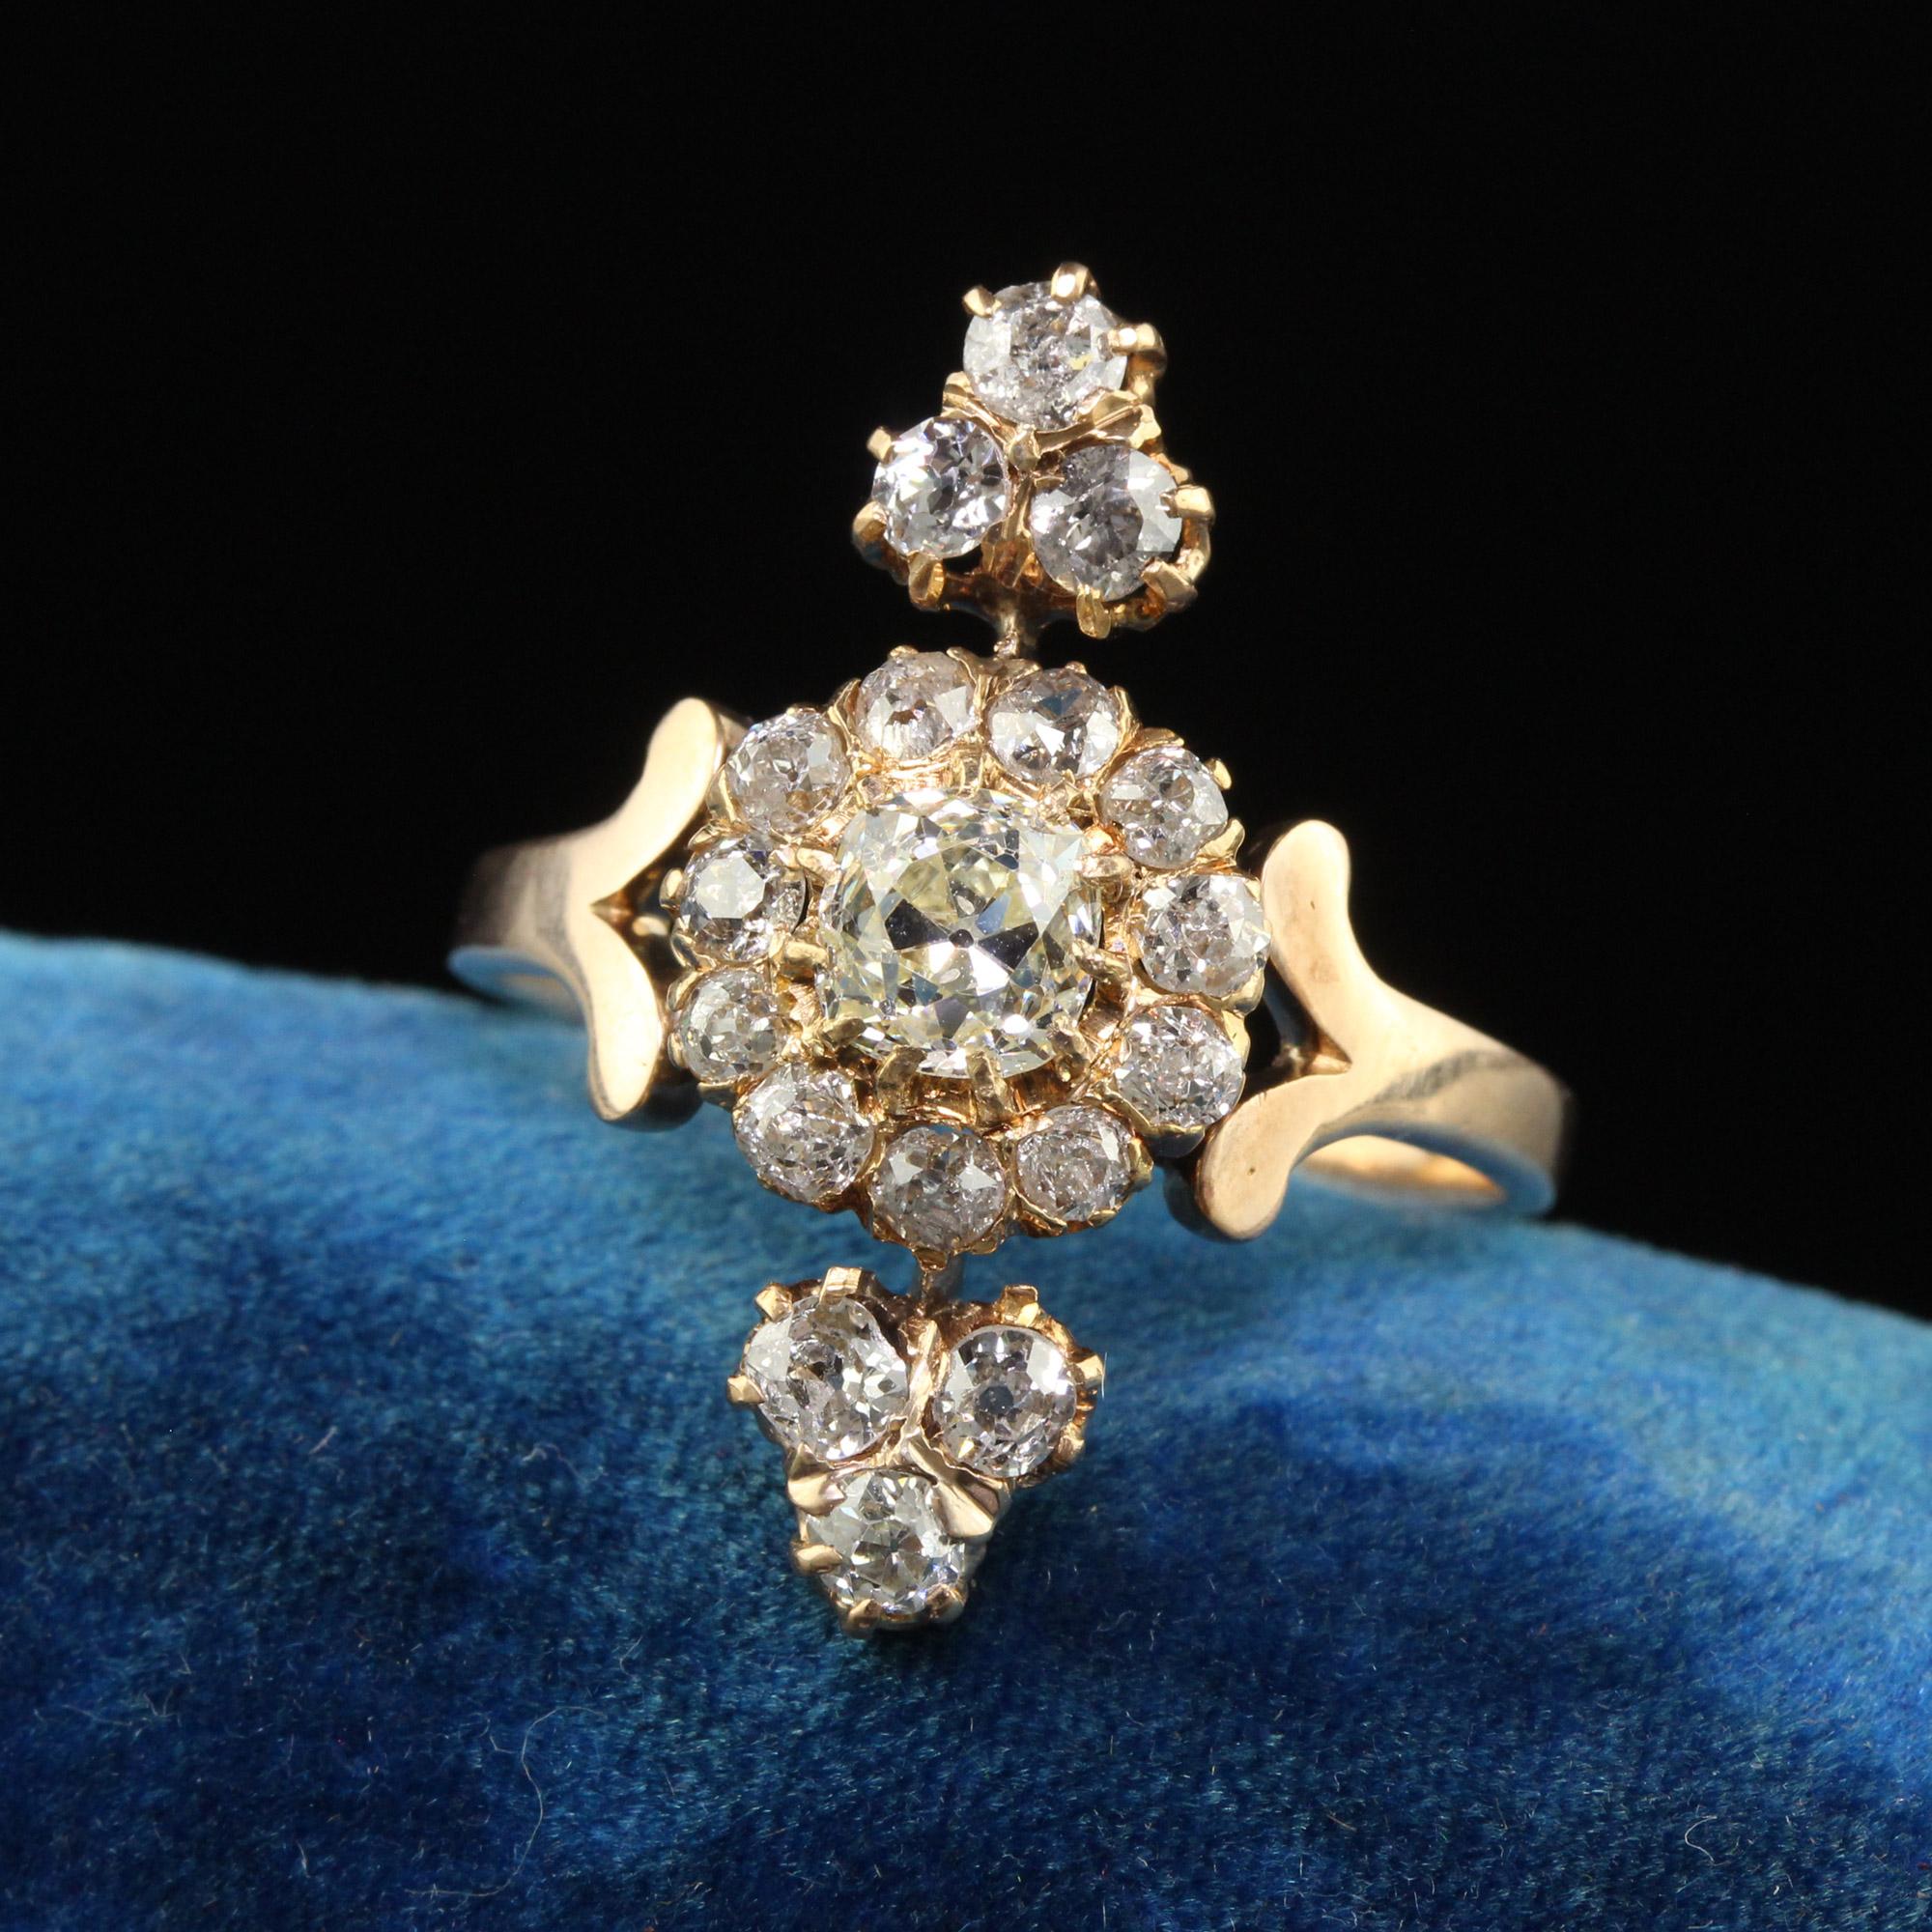 Beautiful Antique Victorian 18K Yellow Gold Old Mine Cut Diamond Cluster Cocktail Ring. This gorgeous Victorian cocktail ring is crafted in 18k yellow gold. The center holds a chunky old mine cut diamond with a yellow hue that is surrounded by white